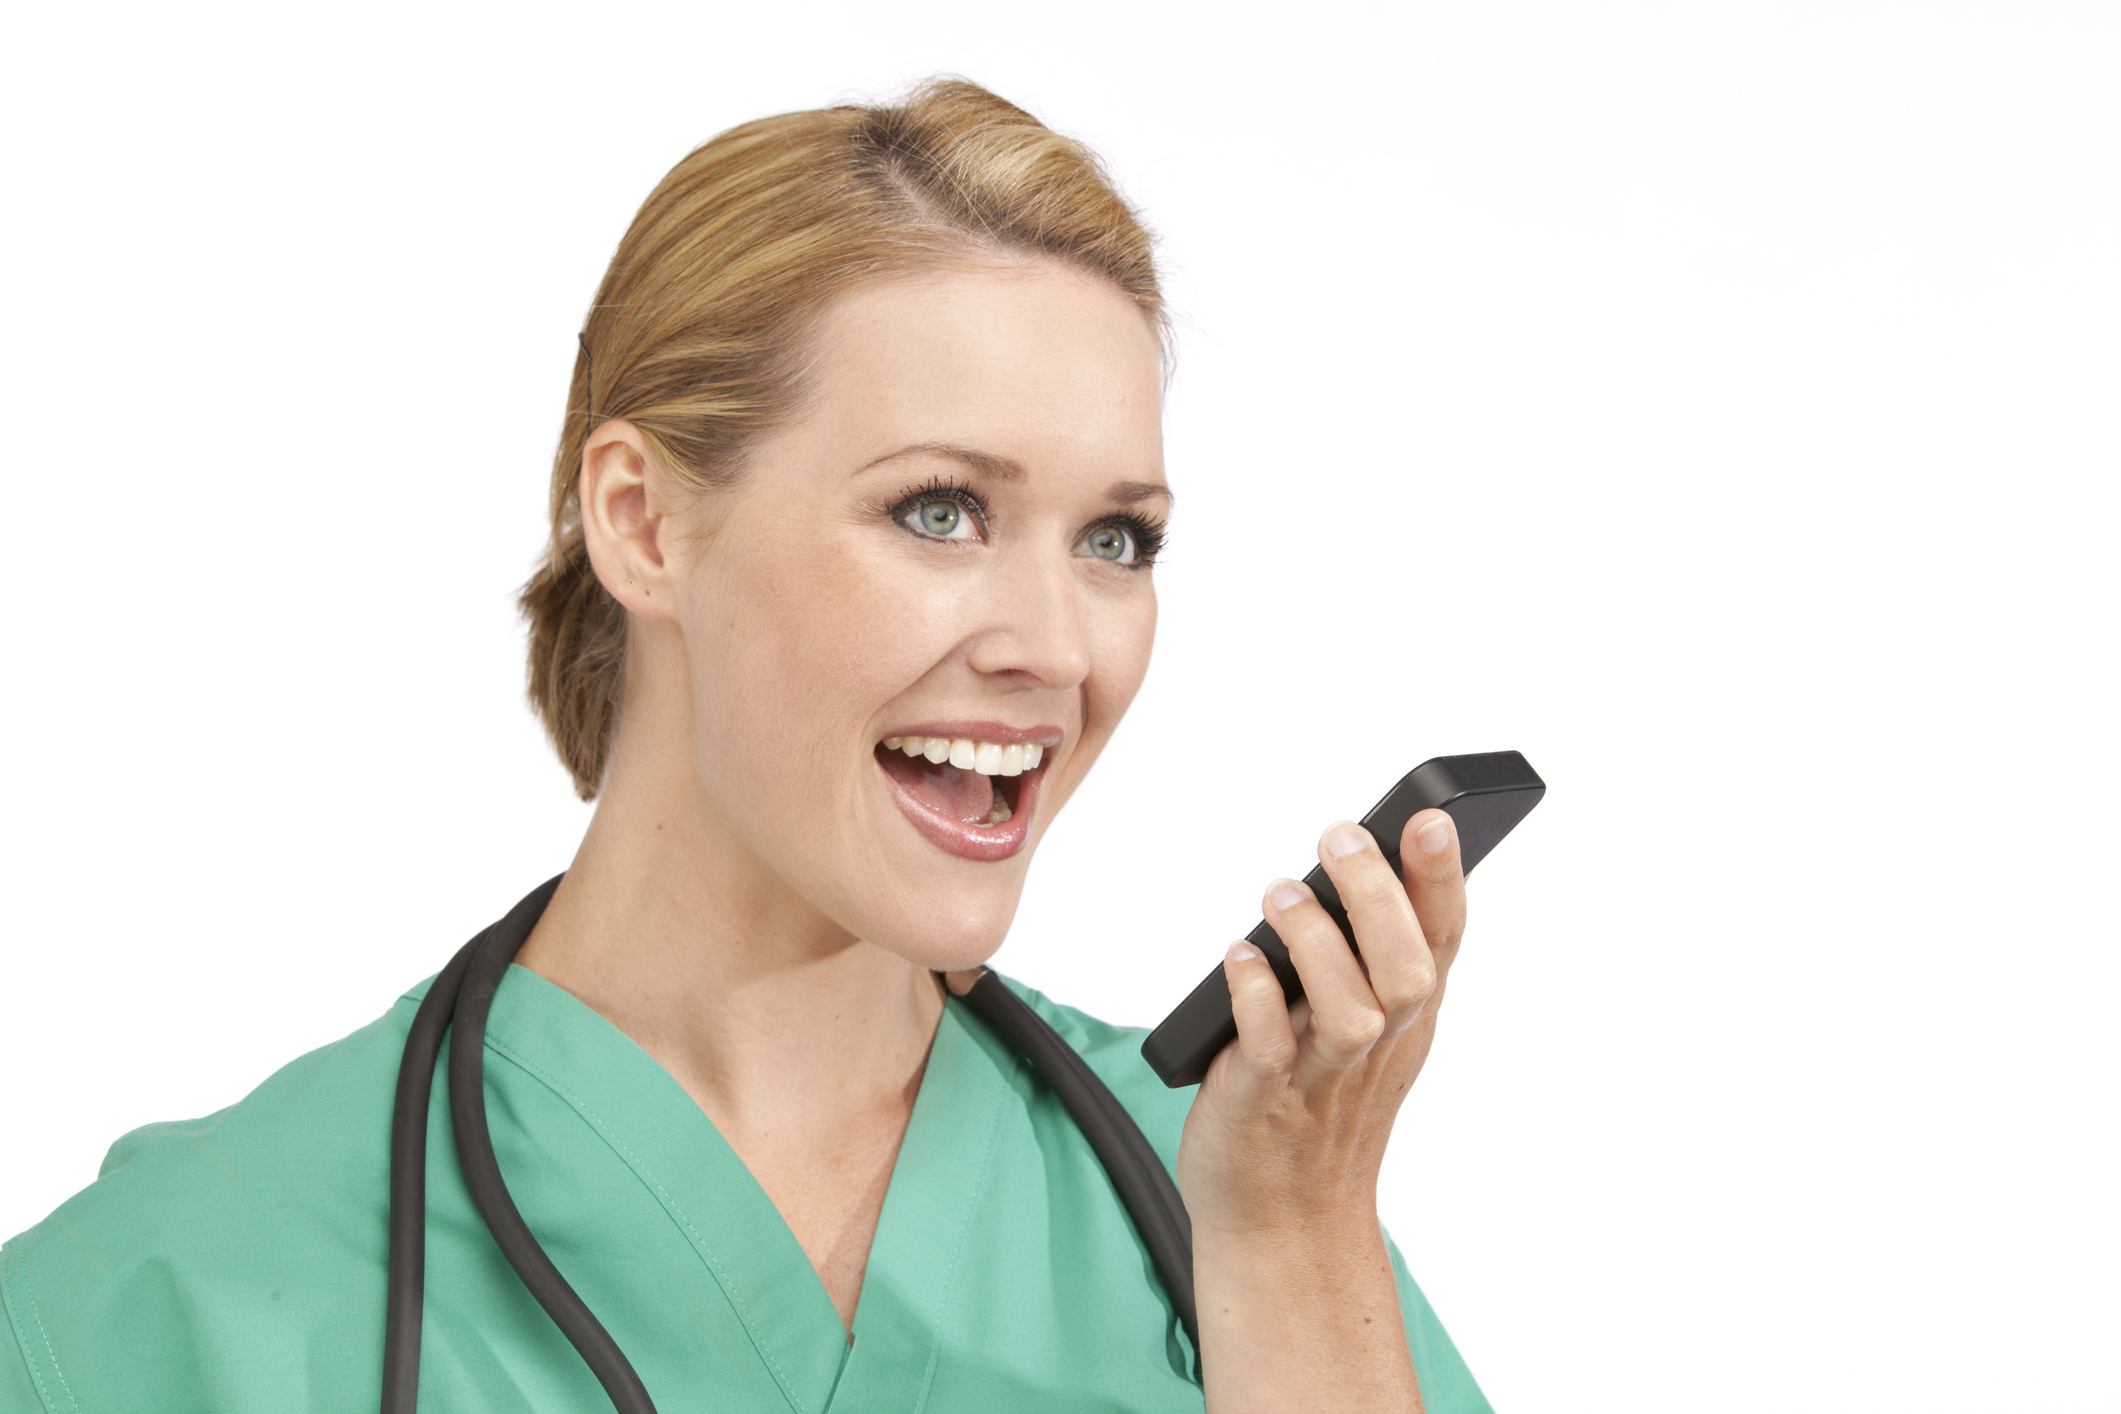 : A woman in medical scrubs talks into a smart phone.